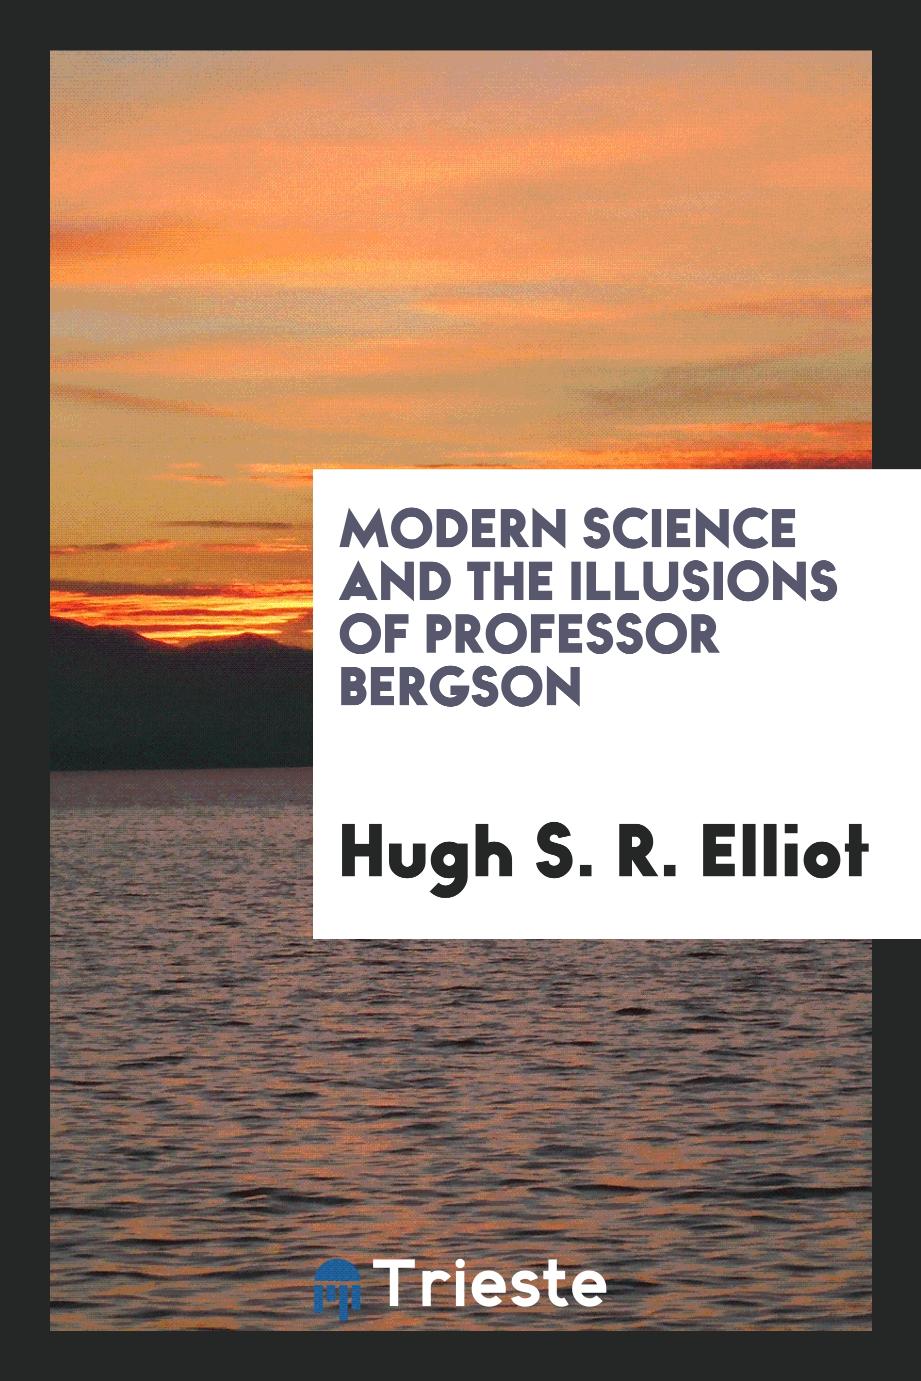 Modern Science and the Illusions of Professor Bergson